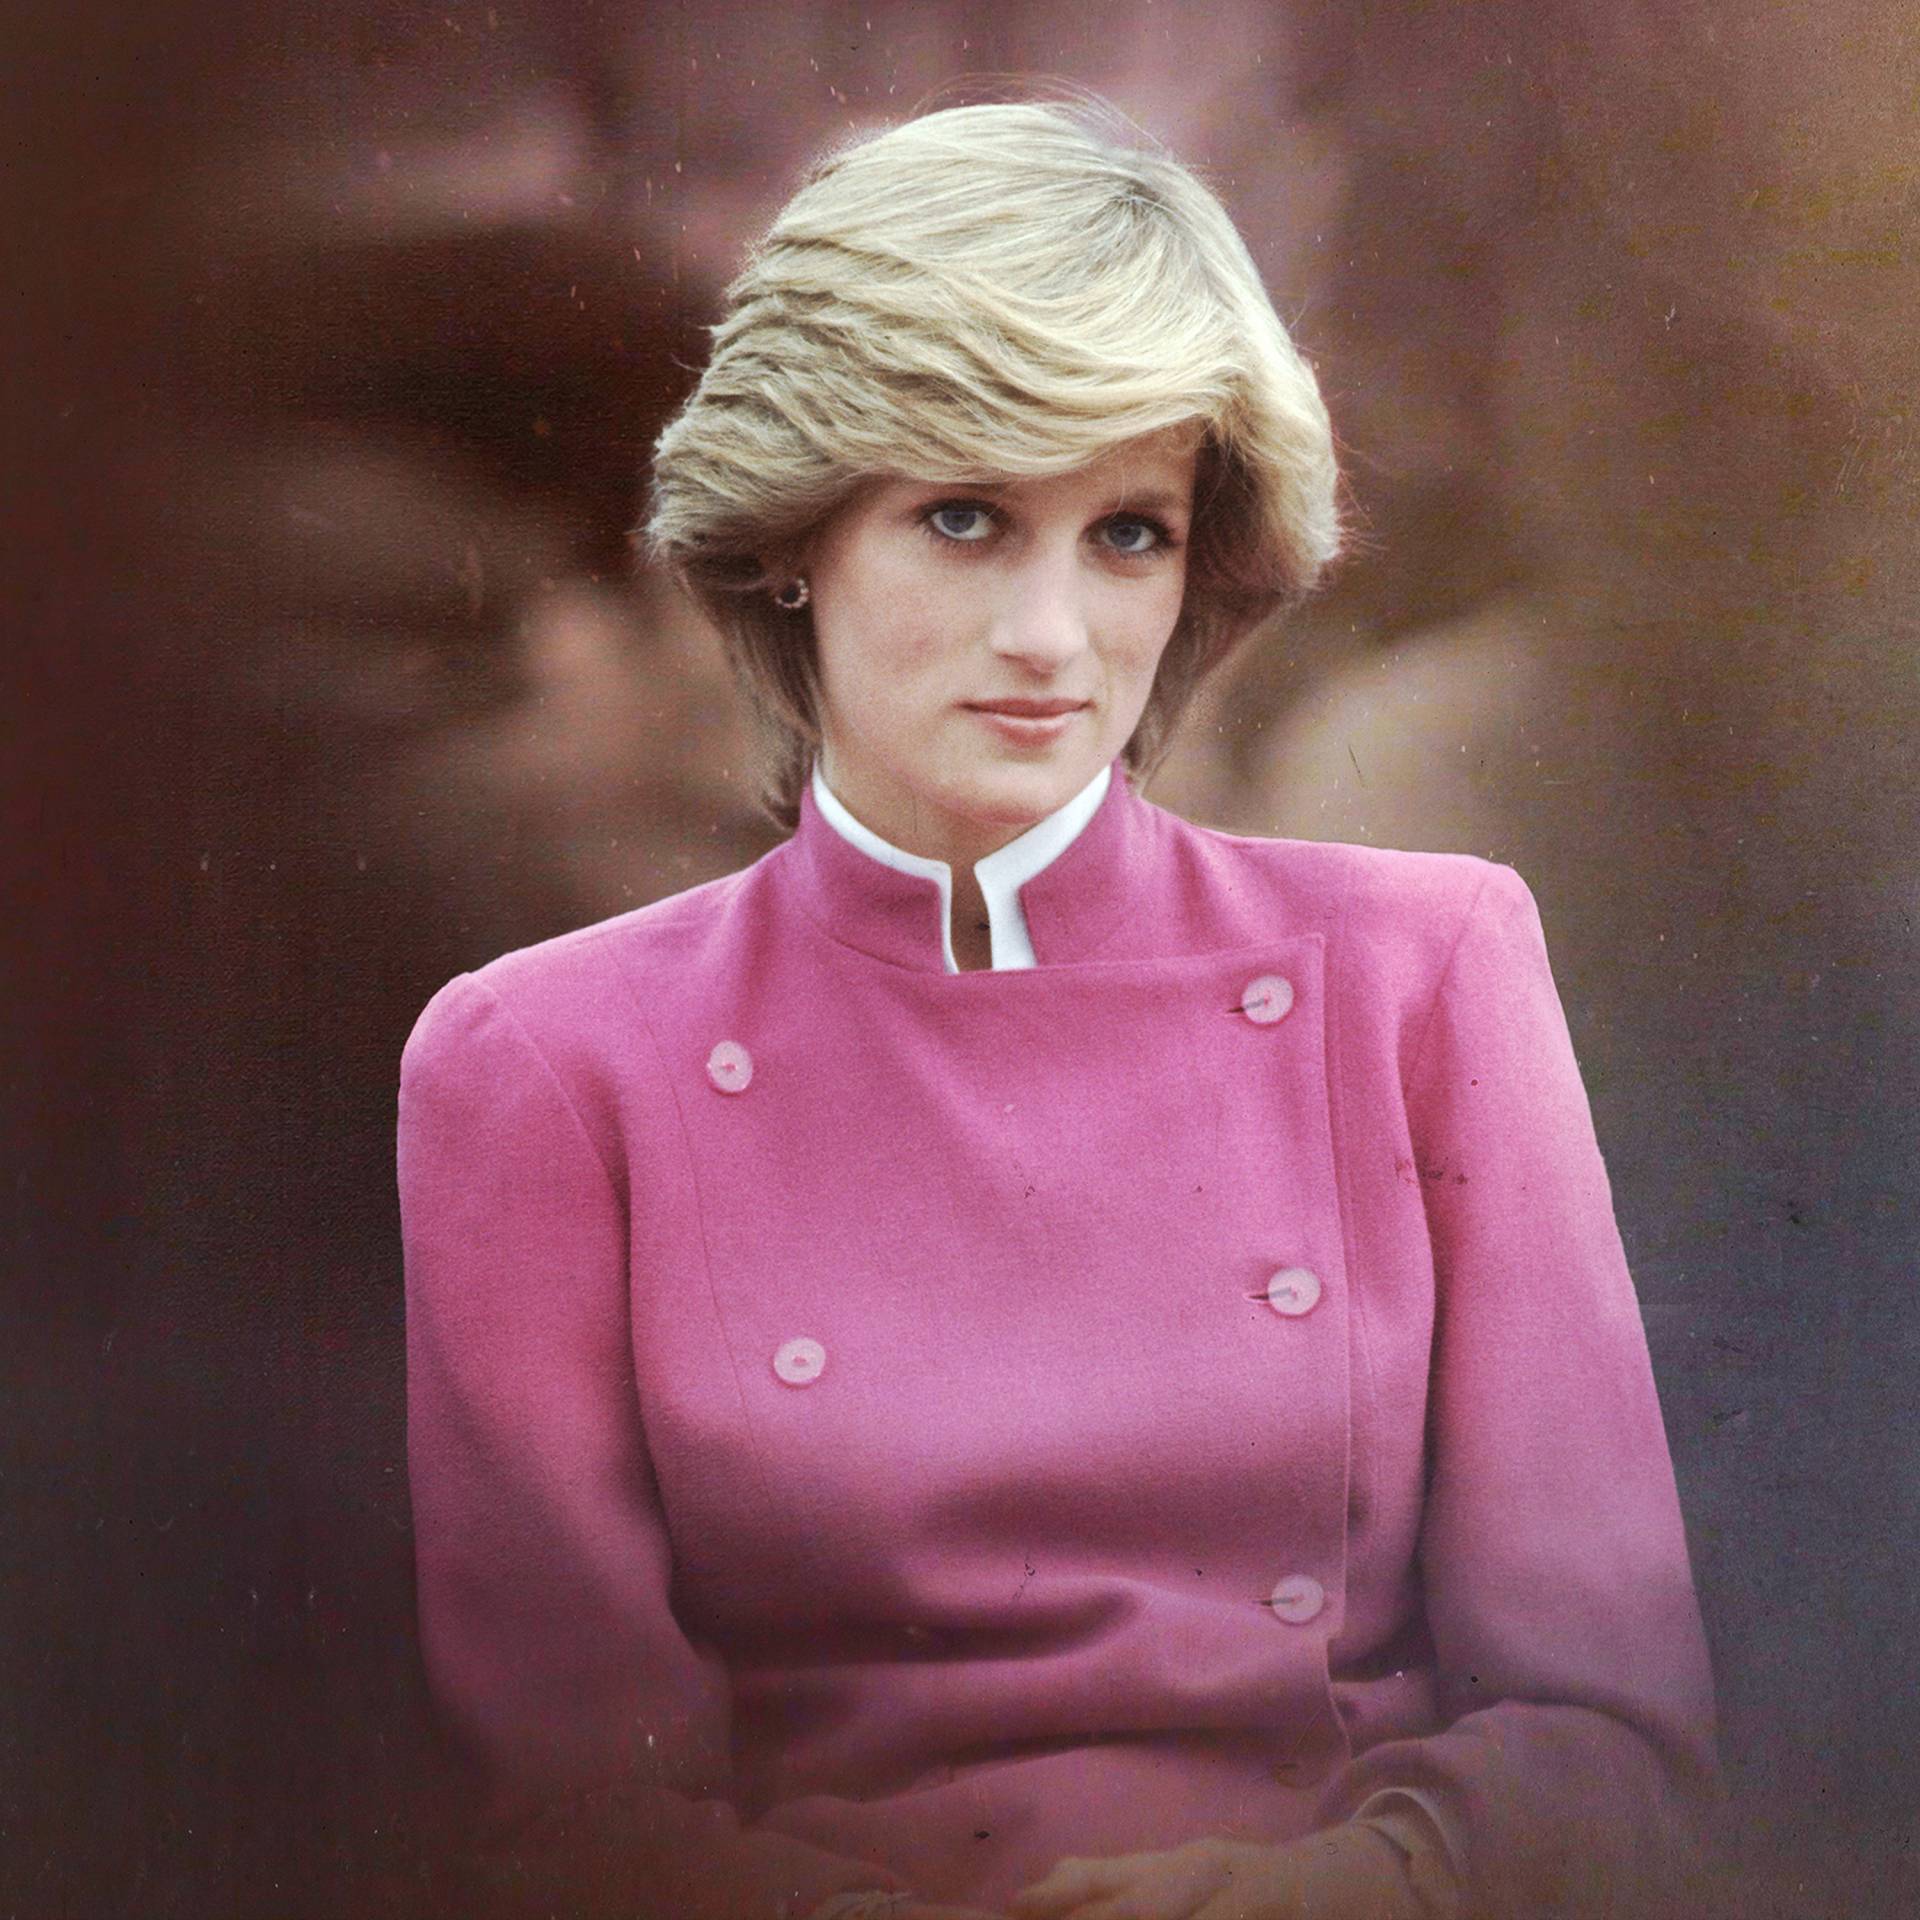 Stream The Diana Investigations | discovery+